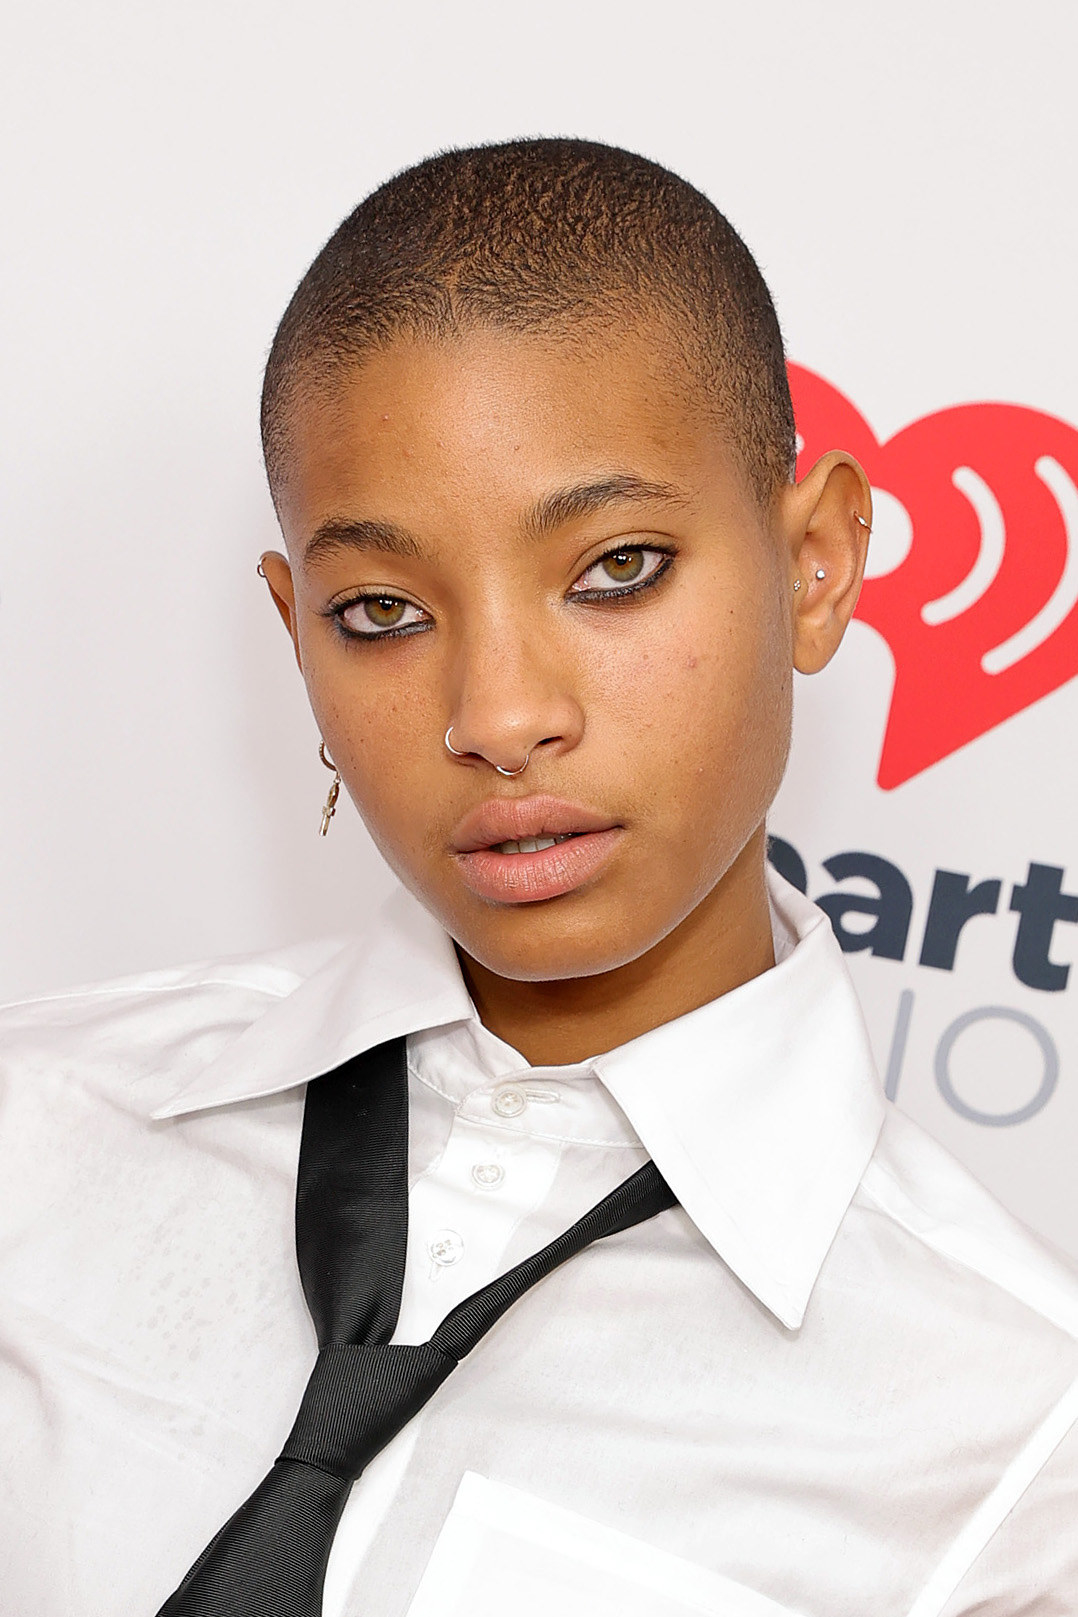 Willow Smith posing on a red carpet